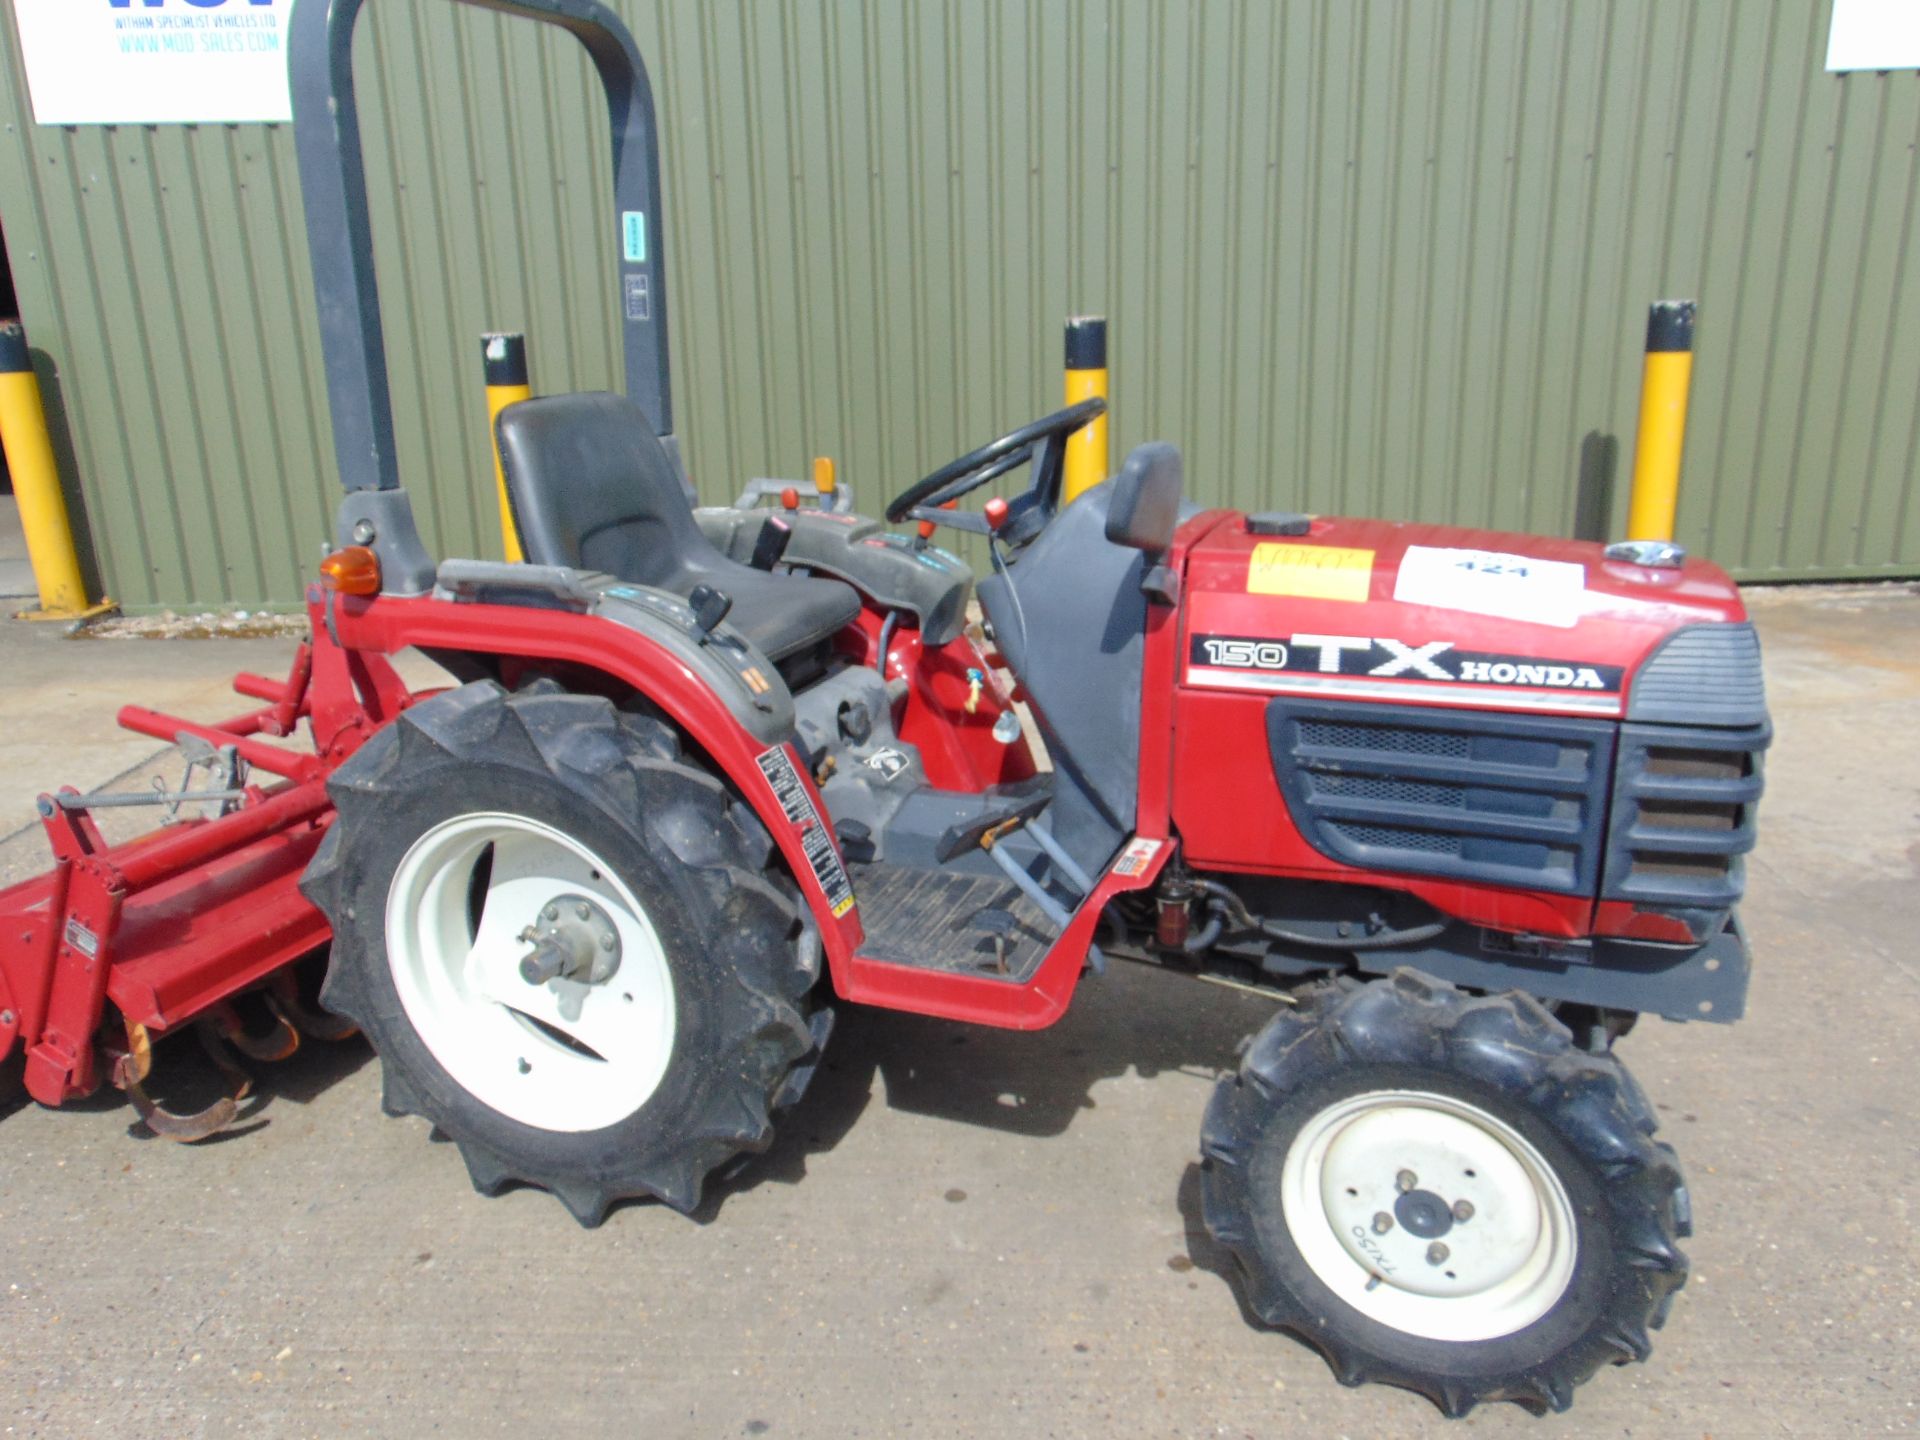 HONDA TX 150 COMPACT TRACTOR C/W ROTAVATOR 4x4 DIESEL - 597 HOURS. - Image 3 of 16